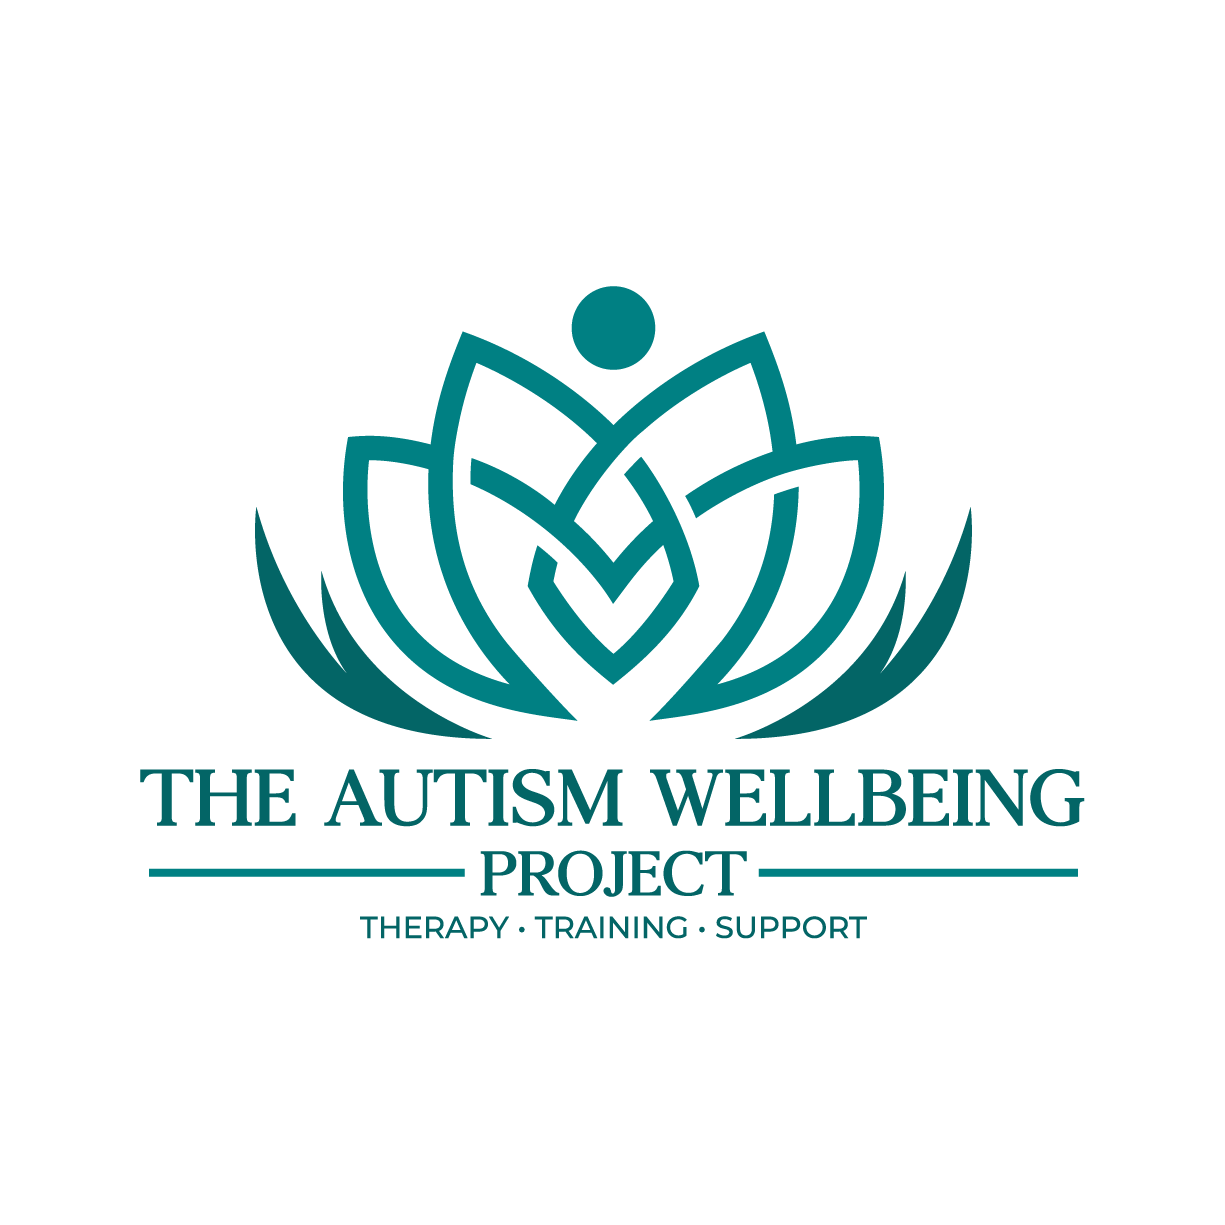 The Autism Wellbeing Project